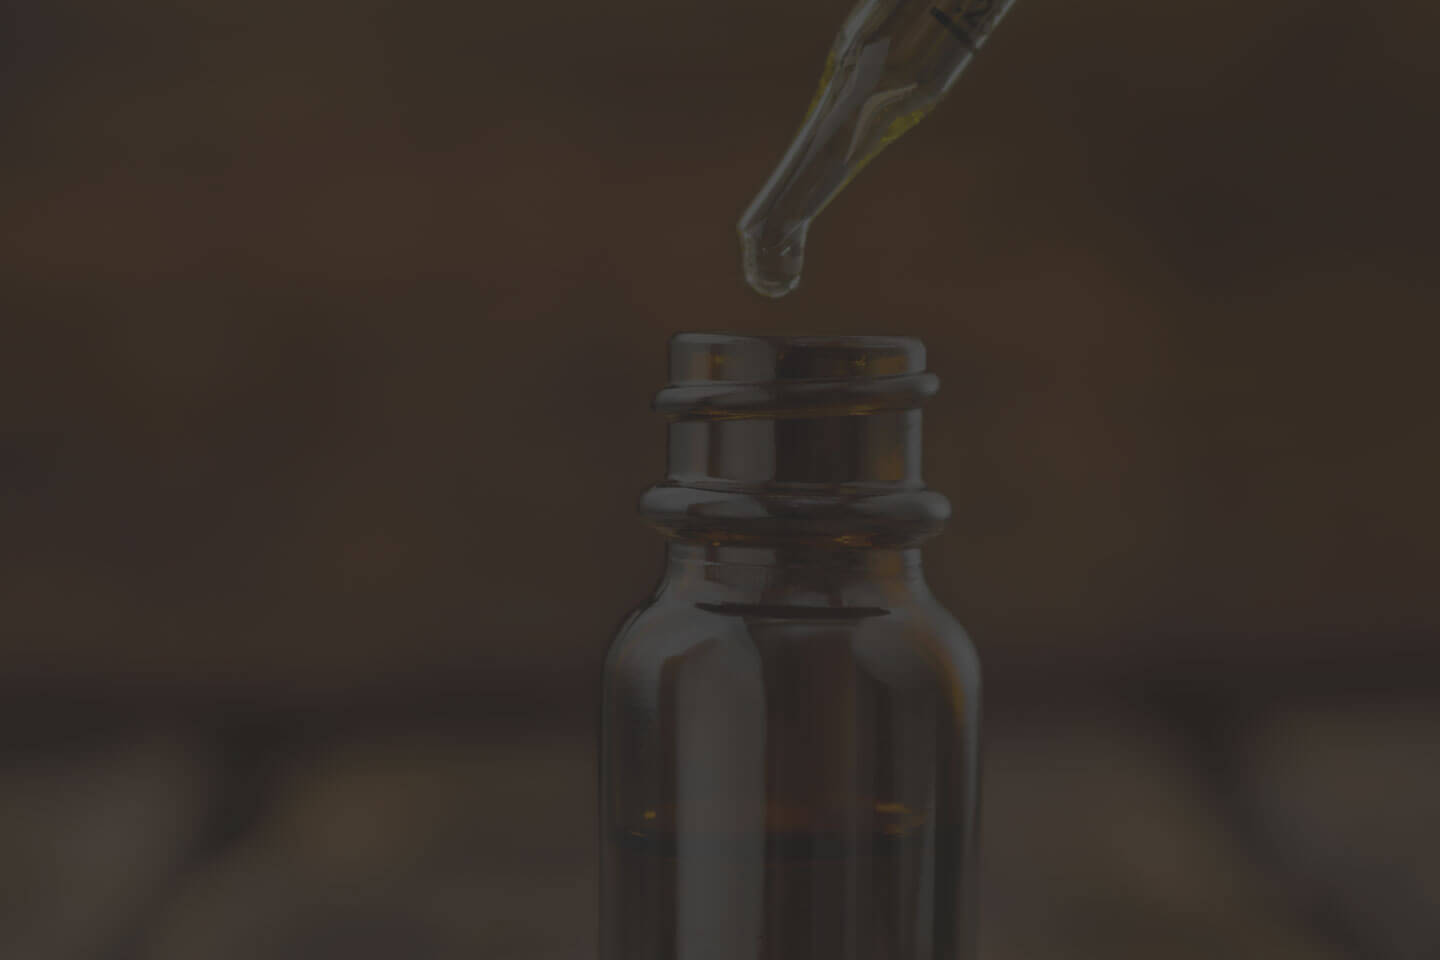 New CBD Products: Which are Legit & Which are Right for You?